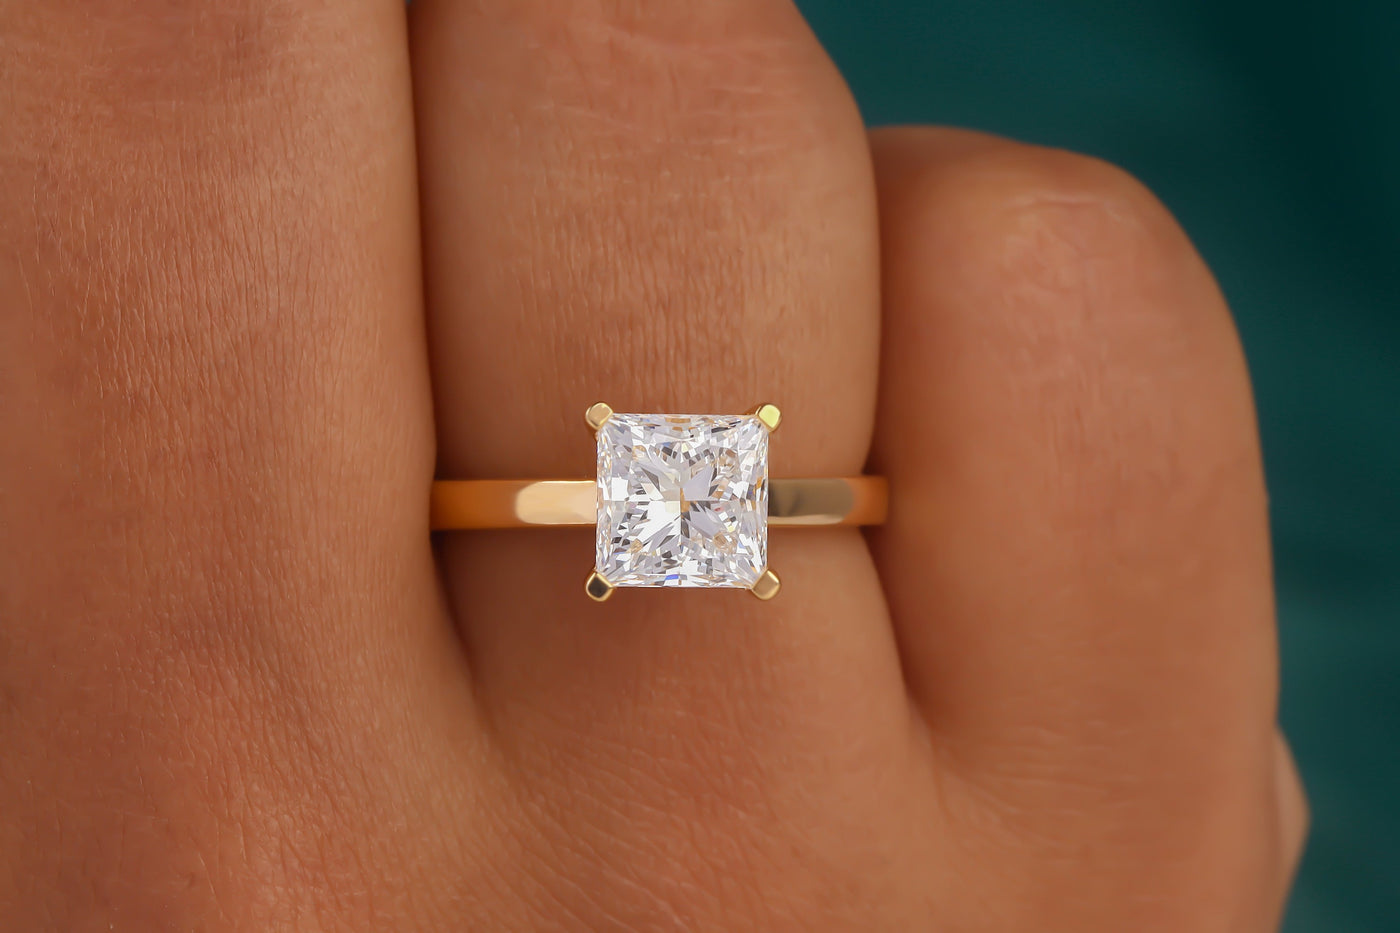 2.00 Ct Princess Cut Colorless Moissanite Engagement Ring, Solid 14K Yellow Gold Ring, Prong Accents Solitaire Wedding Ring, Proposal Ring